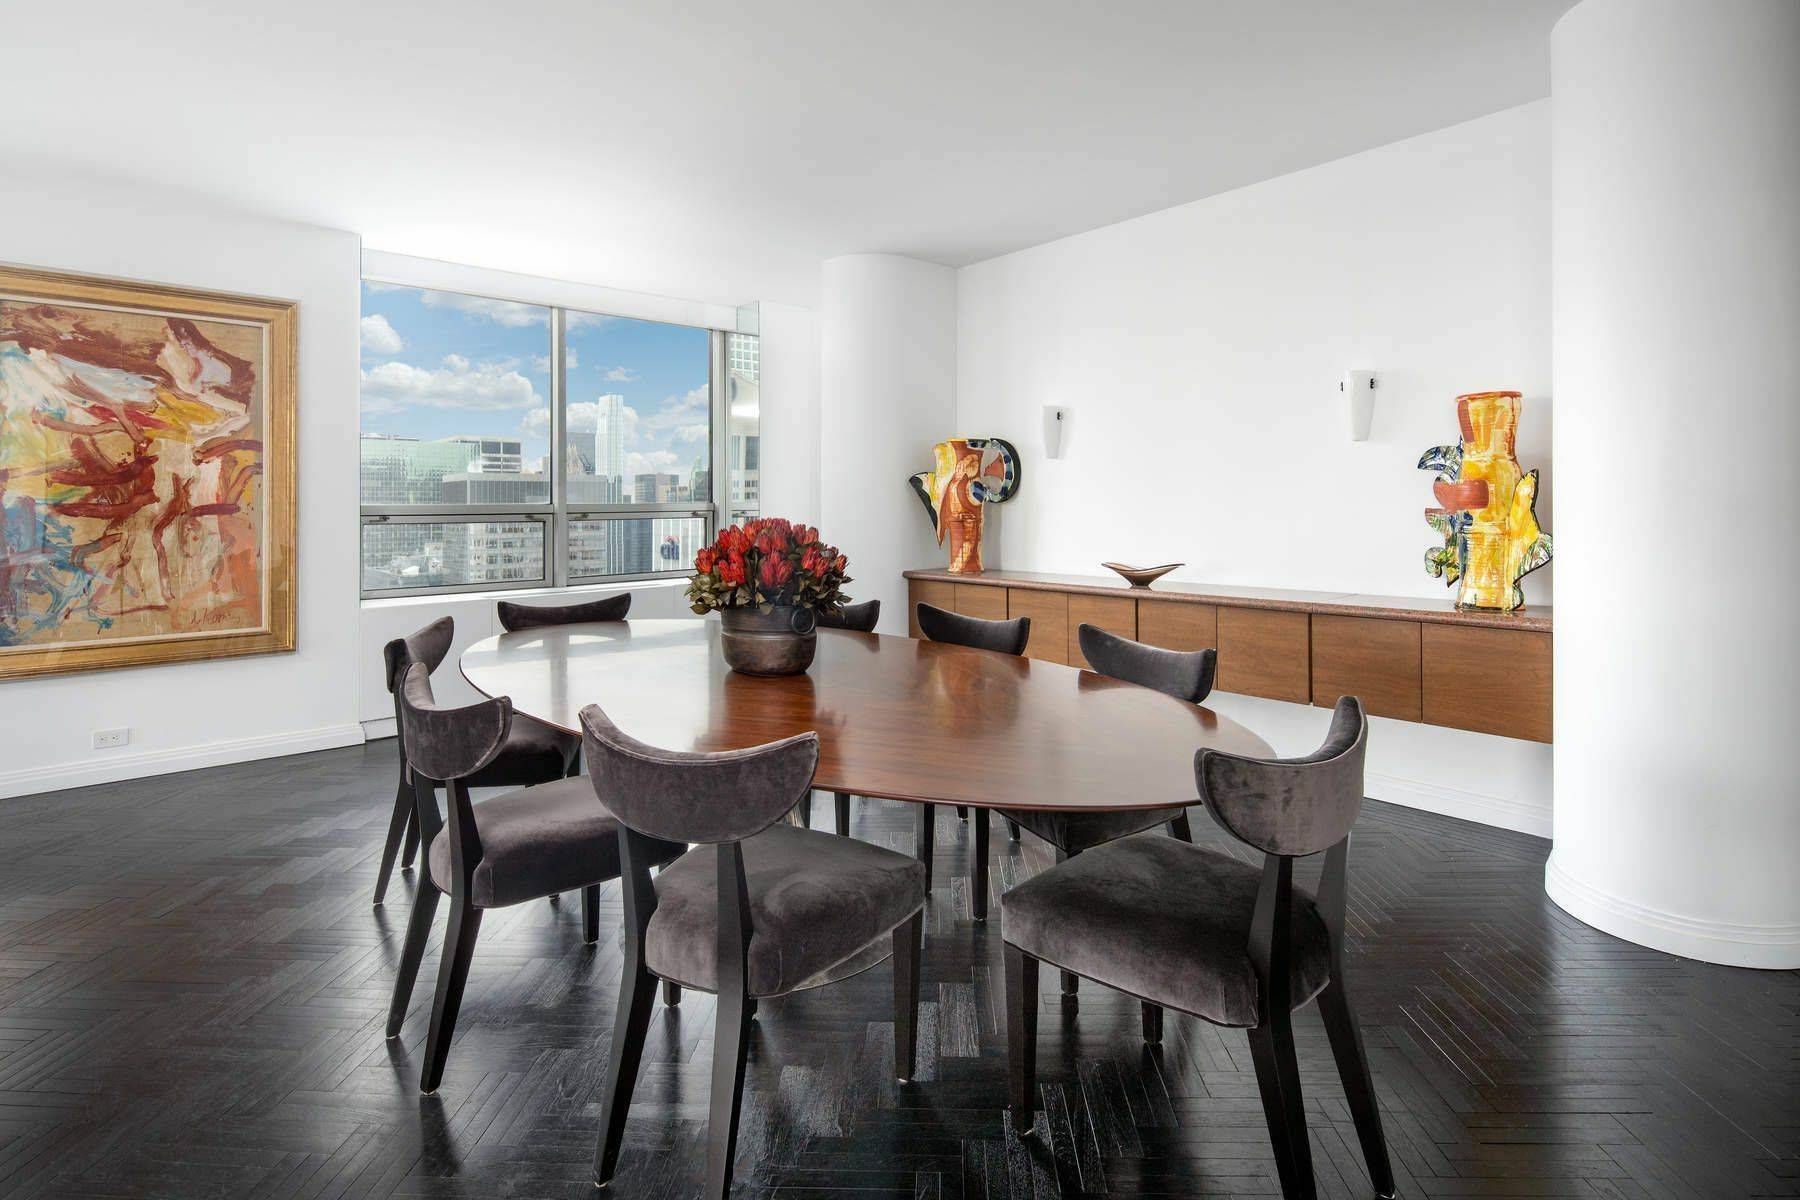 Perched high atop the forty sixth floor of the world renowned Museum Tower, this exquisite 3 bedroom and 3.